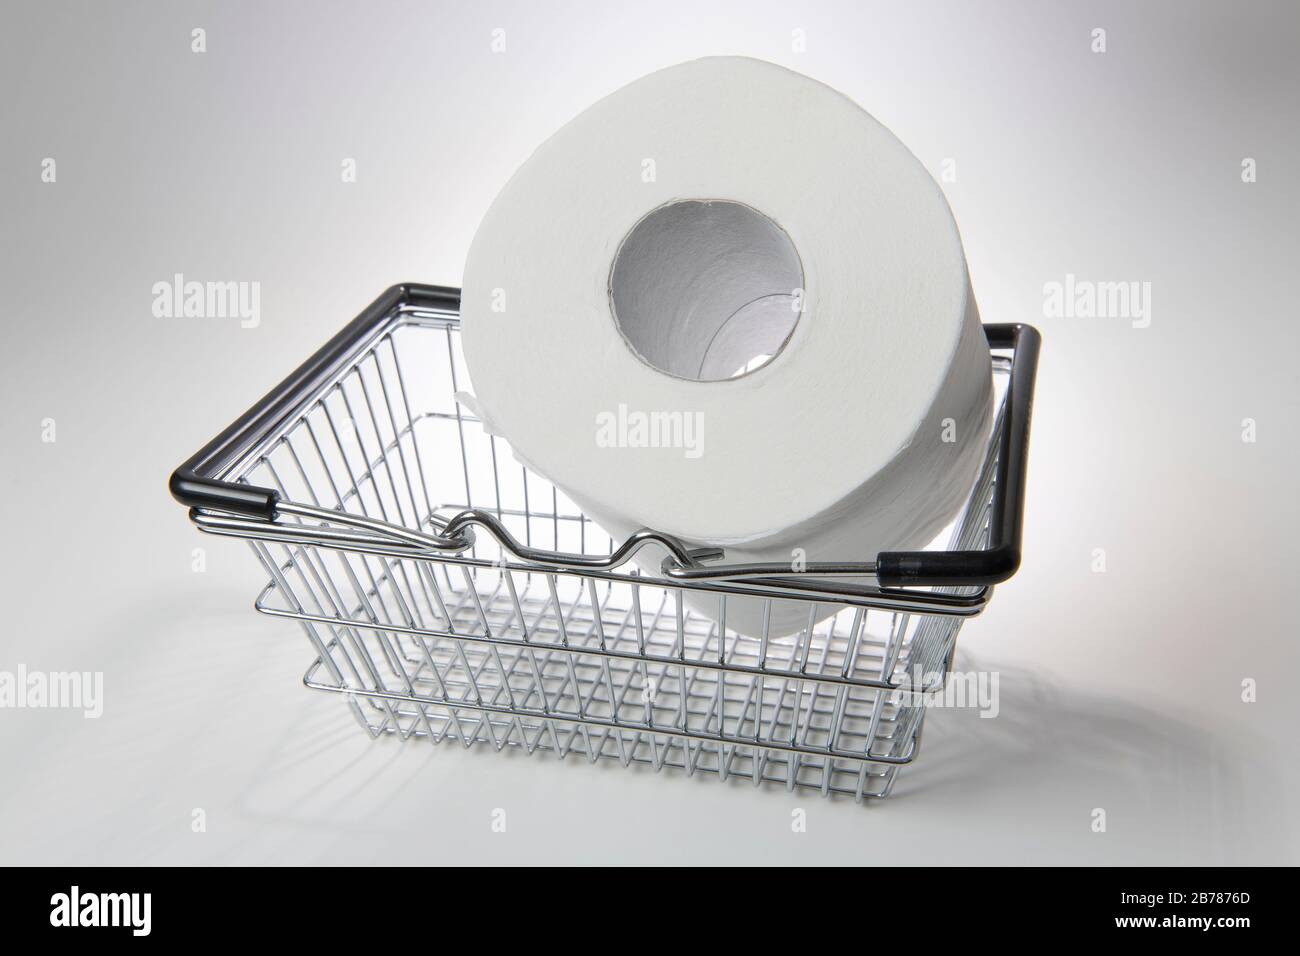 Supermarket shopping basket with giant toilet roll on a white background, backlit Stock Photo